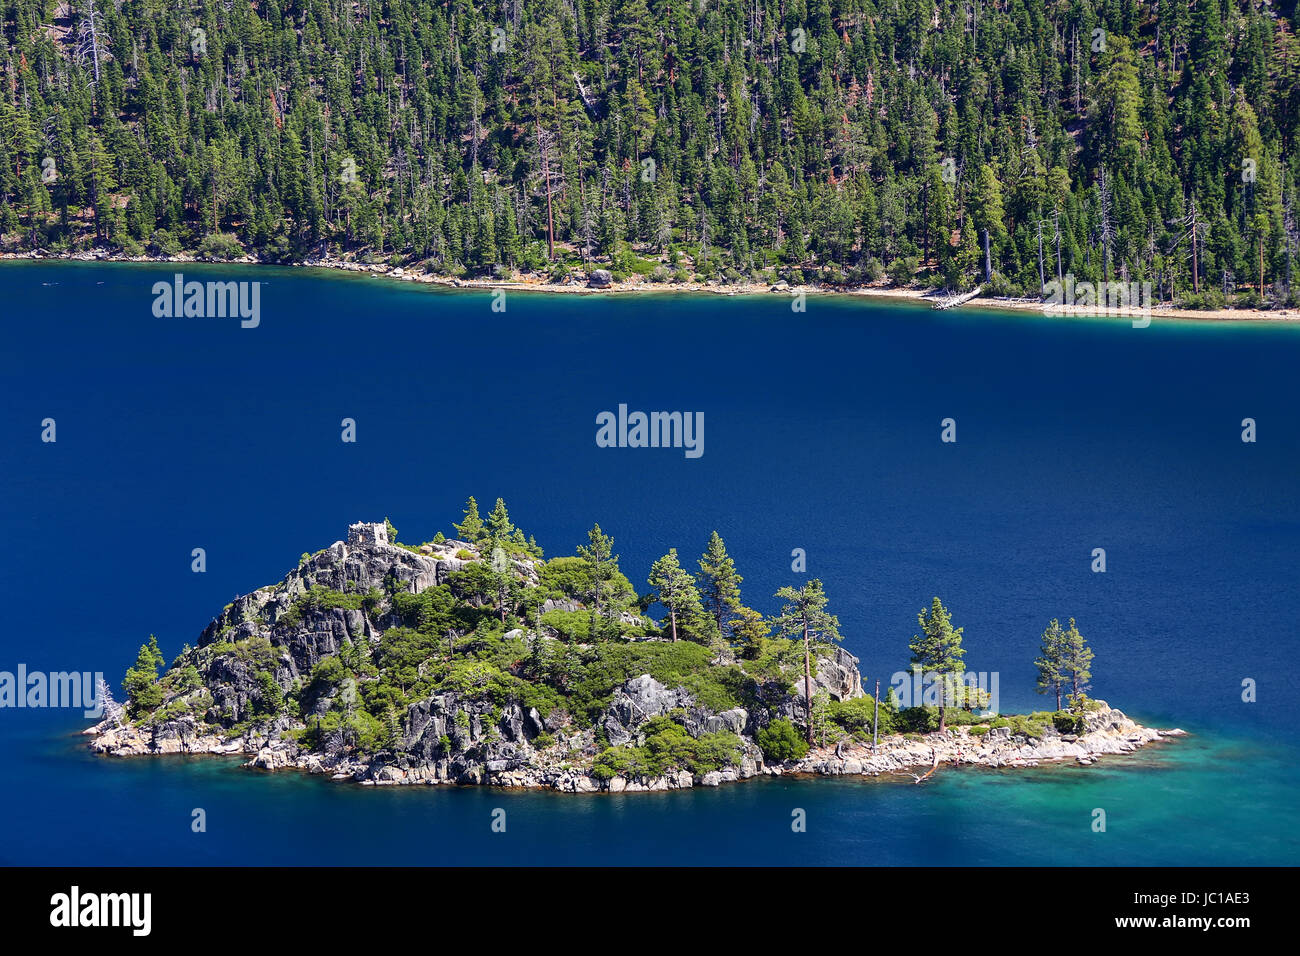 Fannette Island in Emerald Bay, Lake Tahoe, California, USA. Lake Tahoe is the largest alpine lake in North America Stock Photo